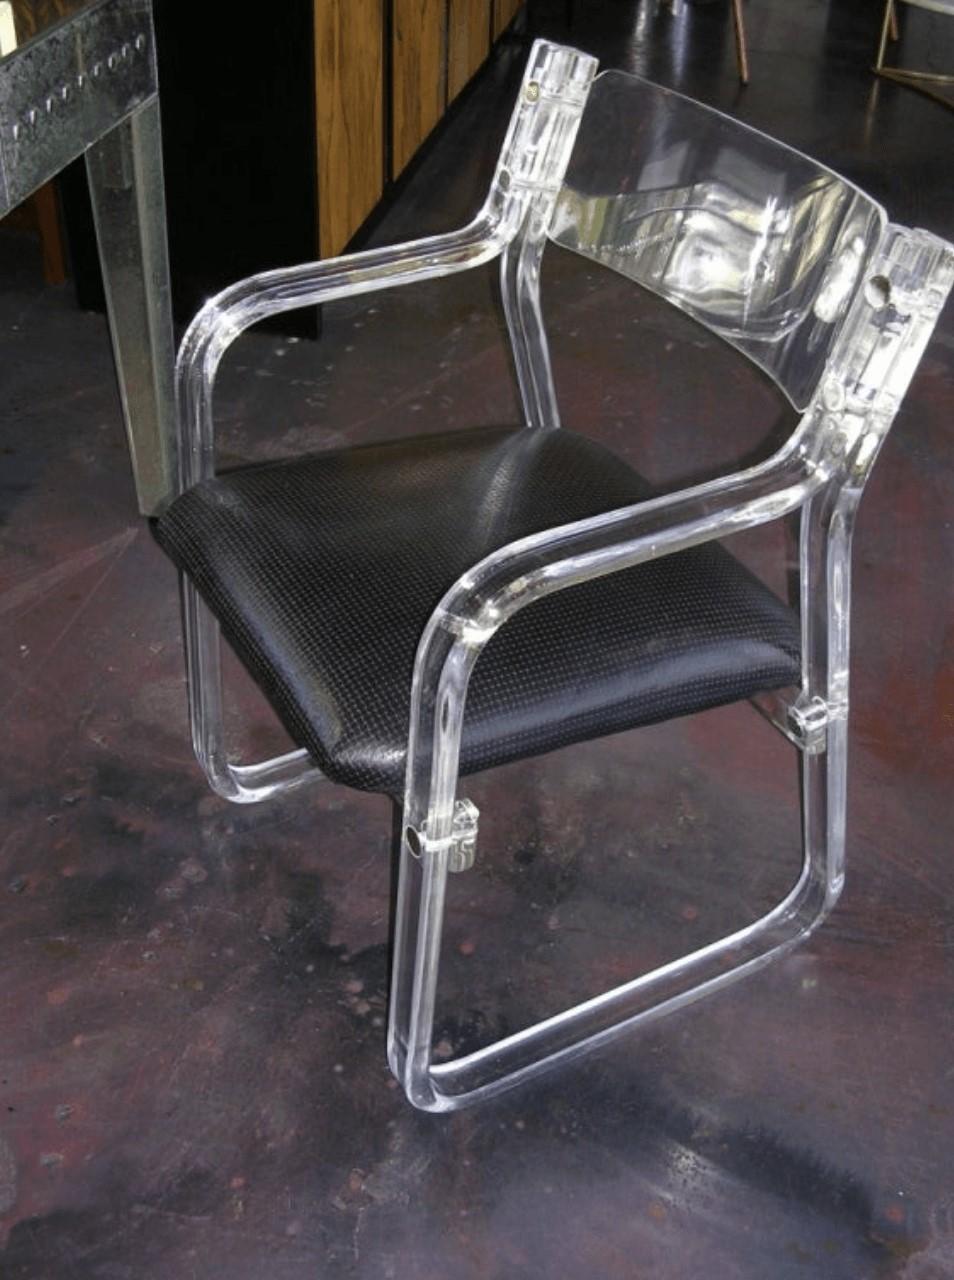 A functional pair of lucite armchairs. Seats are upholstered in embossed black leather. They are quite comfortable and would also make great desk chairs.